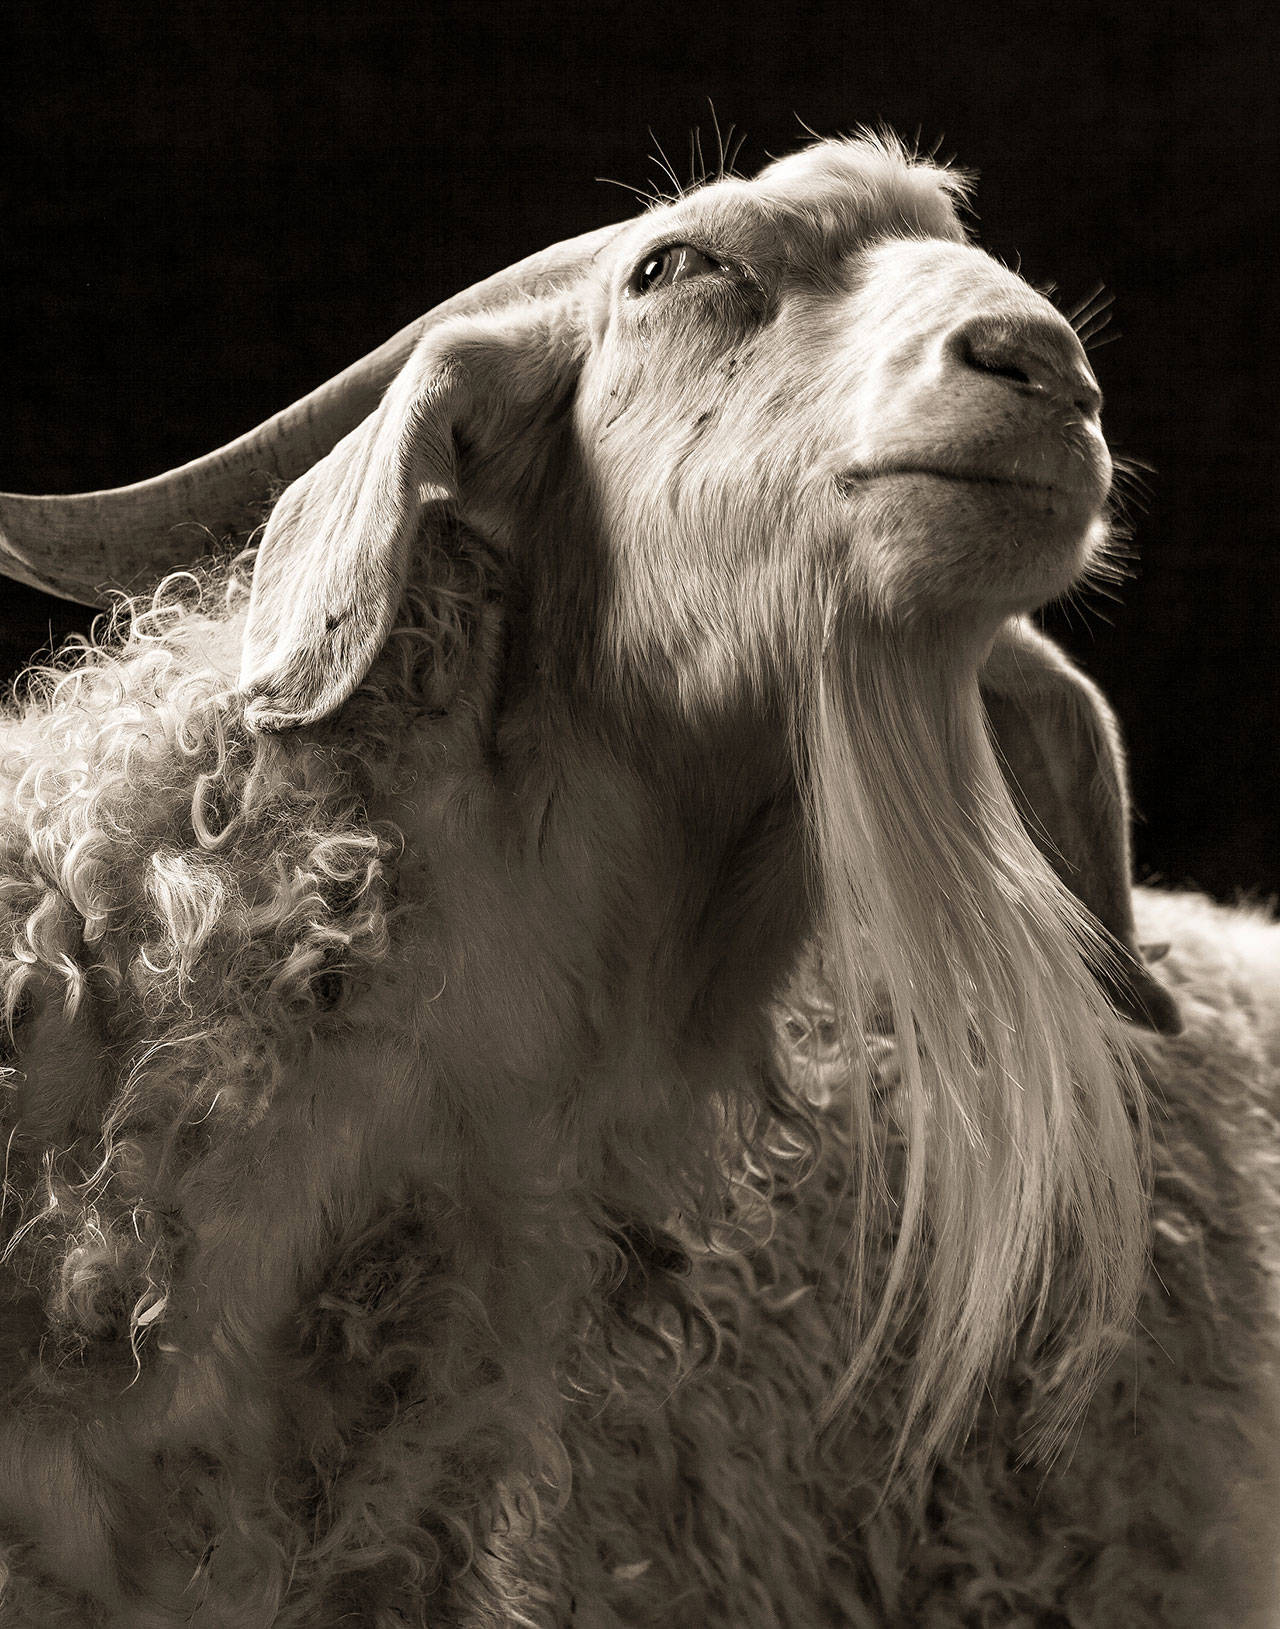 Sydney, one of many goats and sheep portrayed in the new book, “Goats and Sheep: A Portrait Farm” by photographer and Langley resident, Kevin Horan.